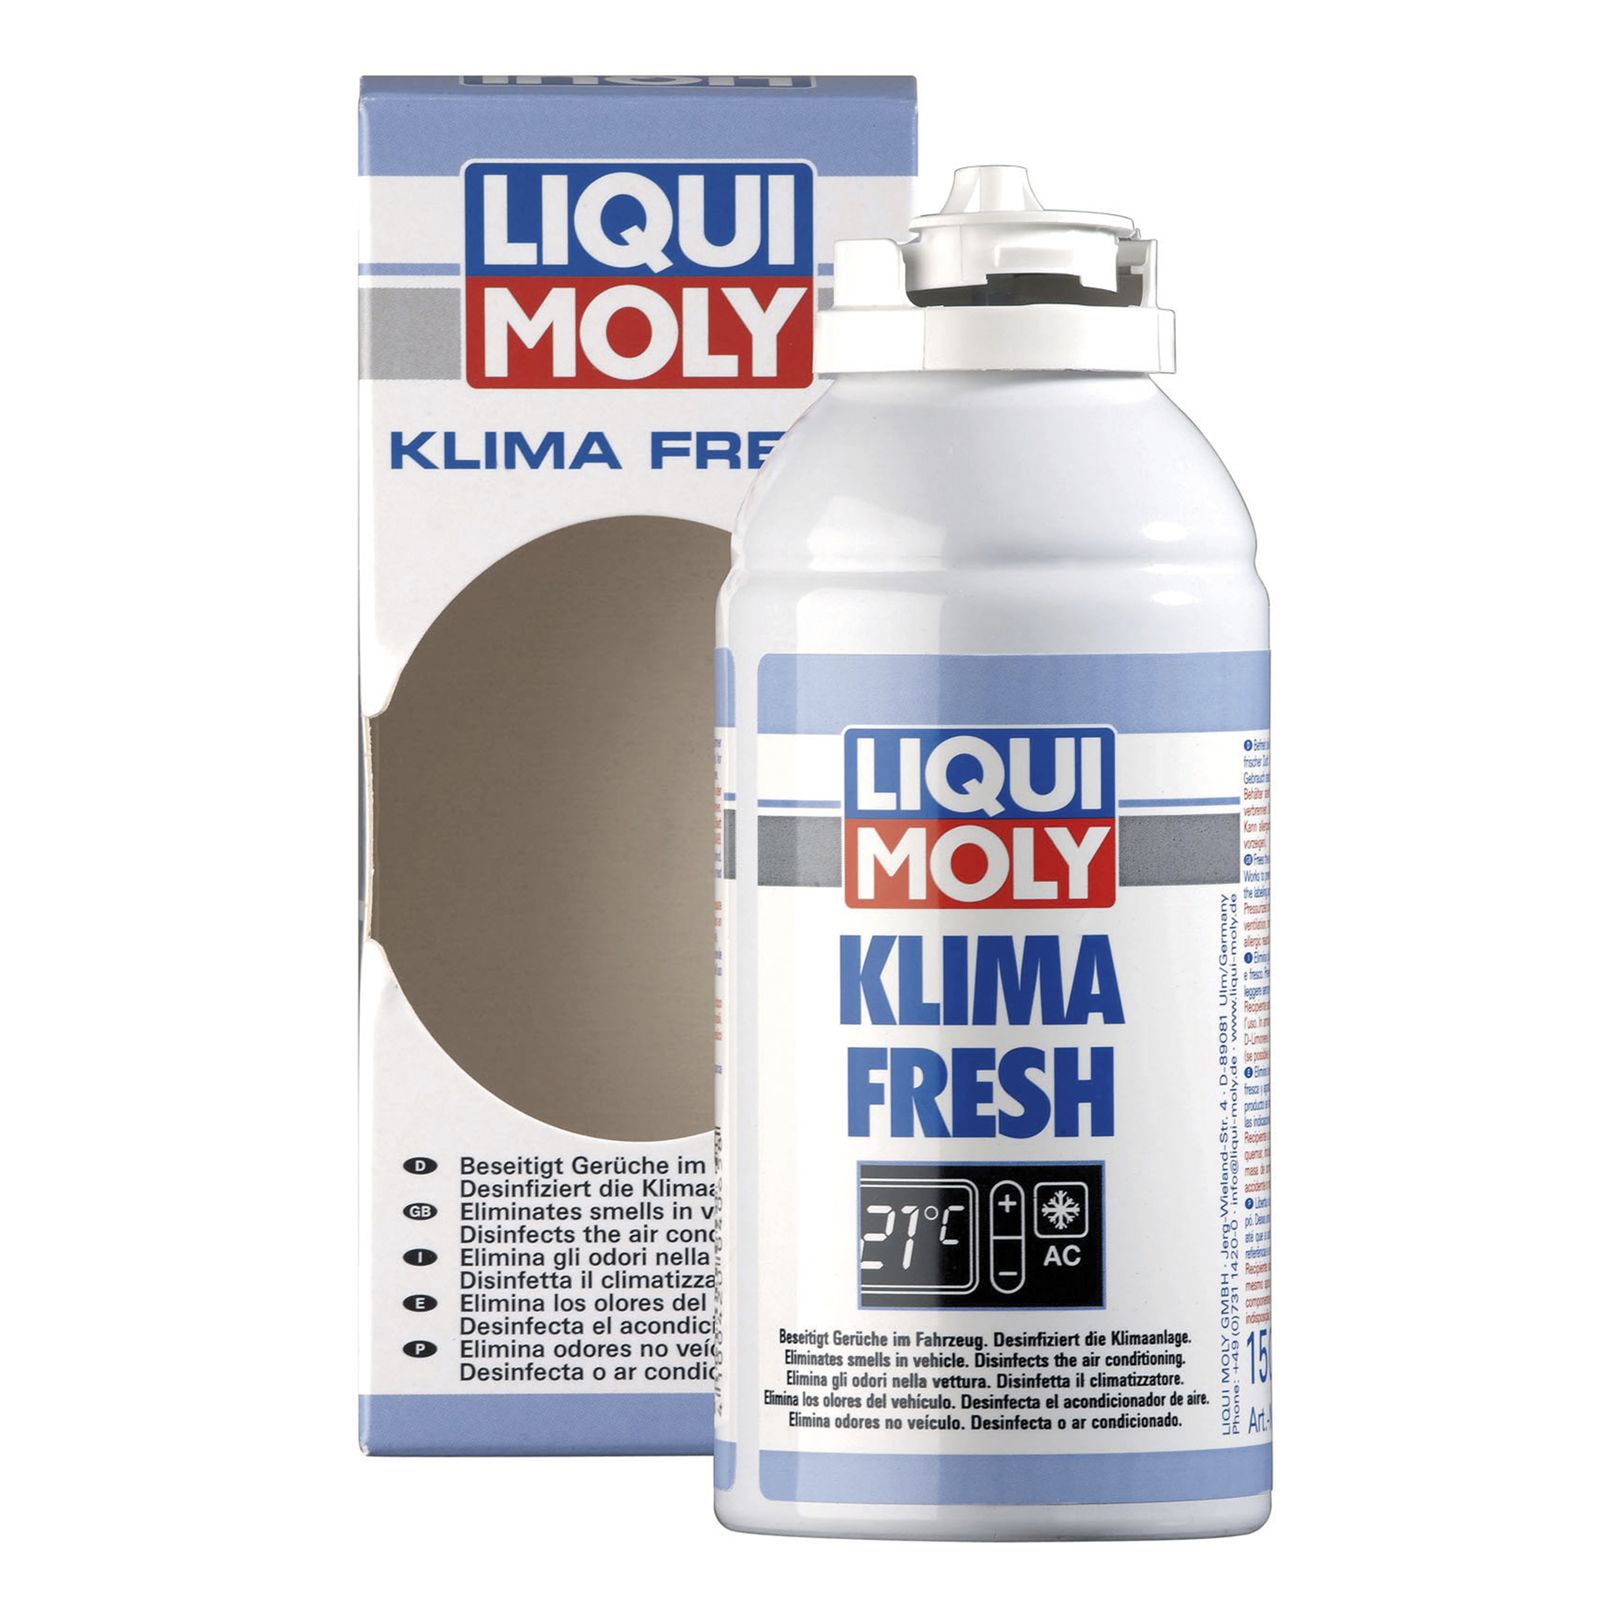 LIQUI MOLY Air Conditioning Cleaner/-Disinfecter Klima-Fresh